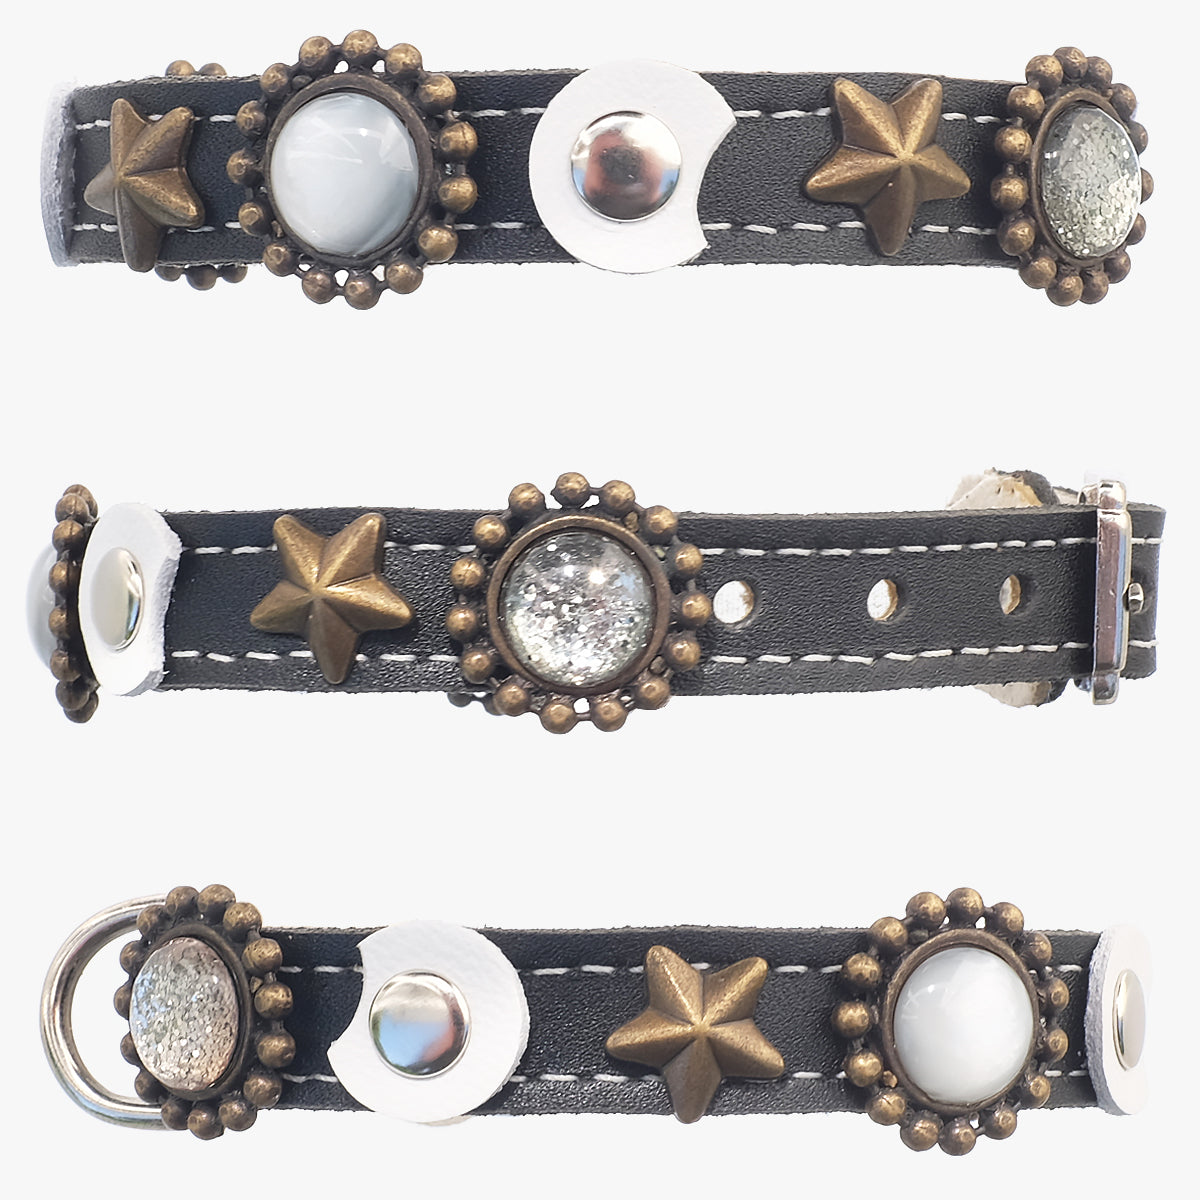 Superpipapo Handmade Leather Cat Collar, In Black & White With Studs, Stars, Stones & Ornaments | at Made Moggie